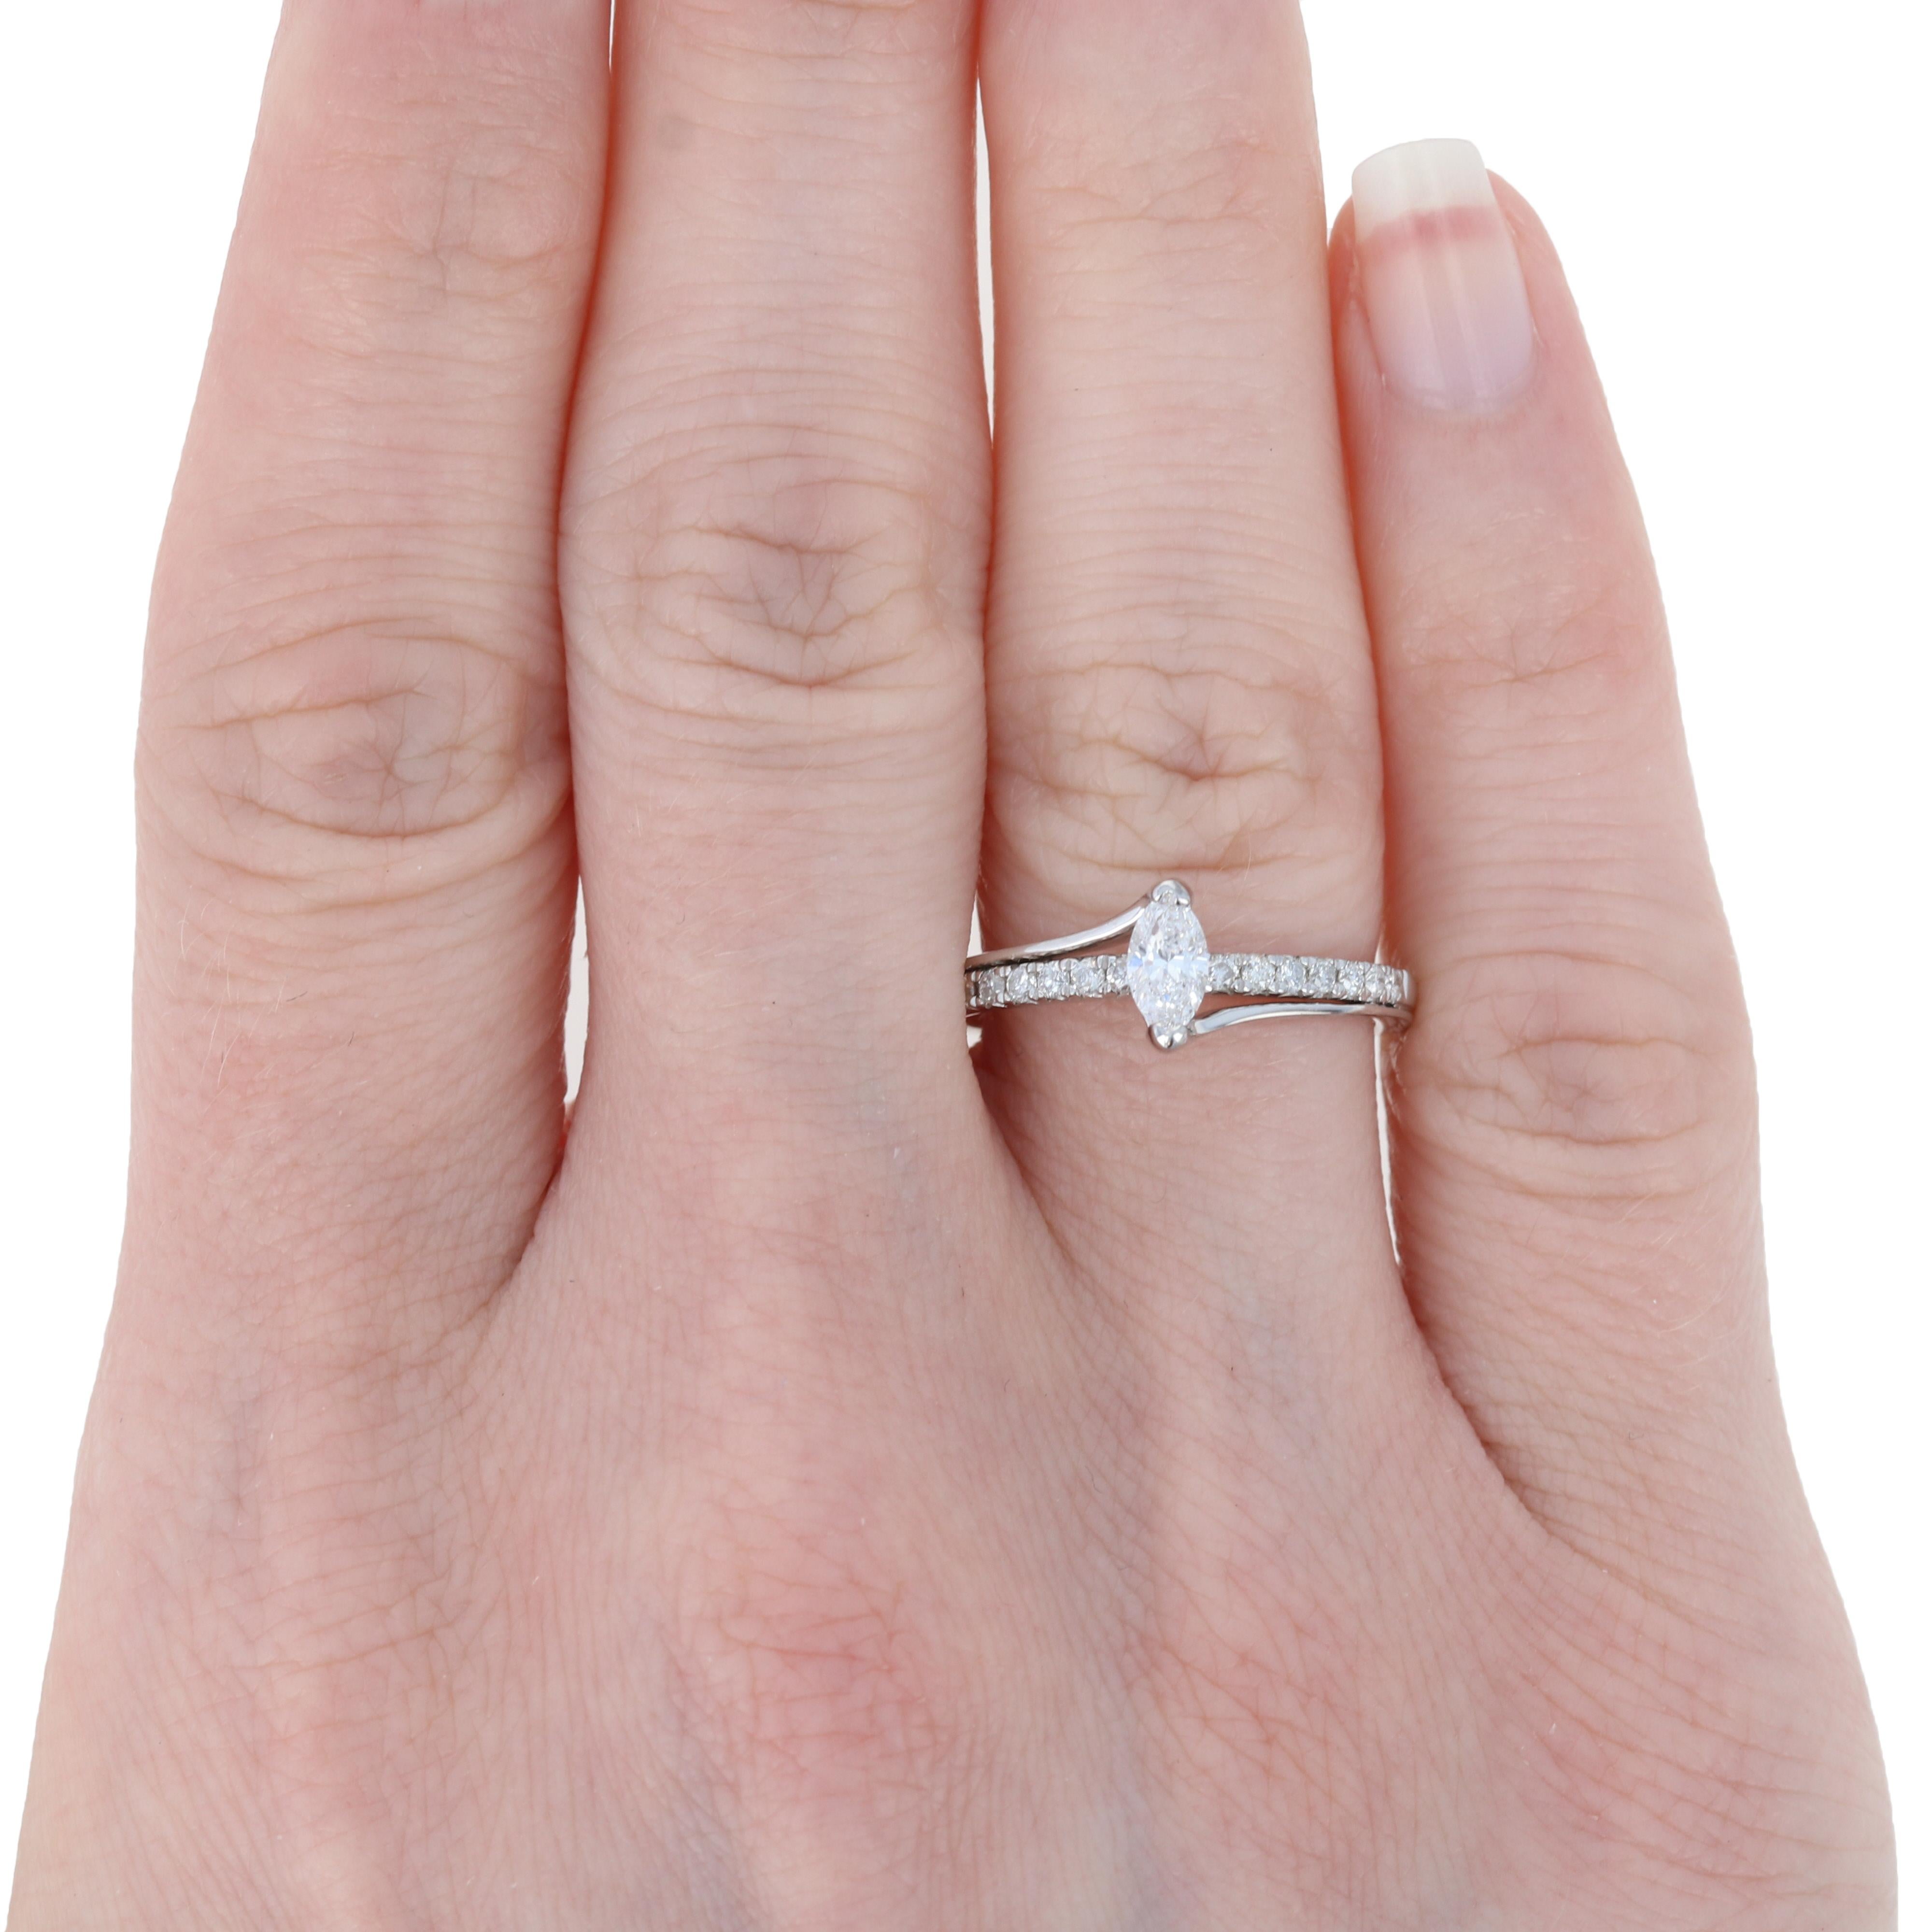 Dazzle your bride-to-be when you propose to her with this stunning diamond engagement ring! Beautifully crafted in 14k white gold and fashioned in a sophisticated bypass style, this NEW ring showcases a .31 carat total weight marquise cut natural